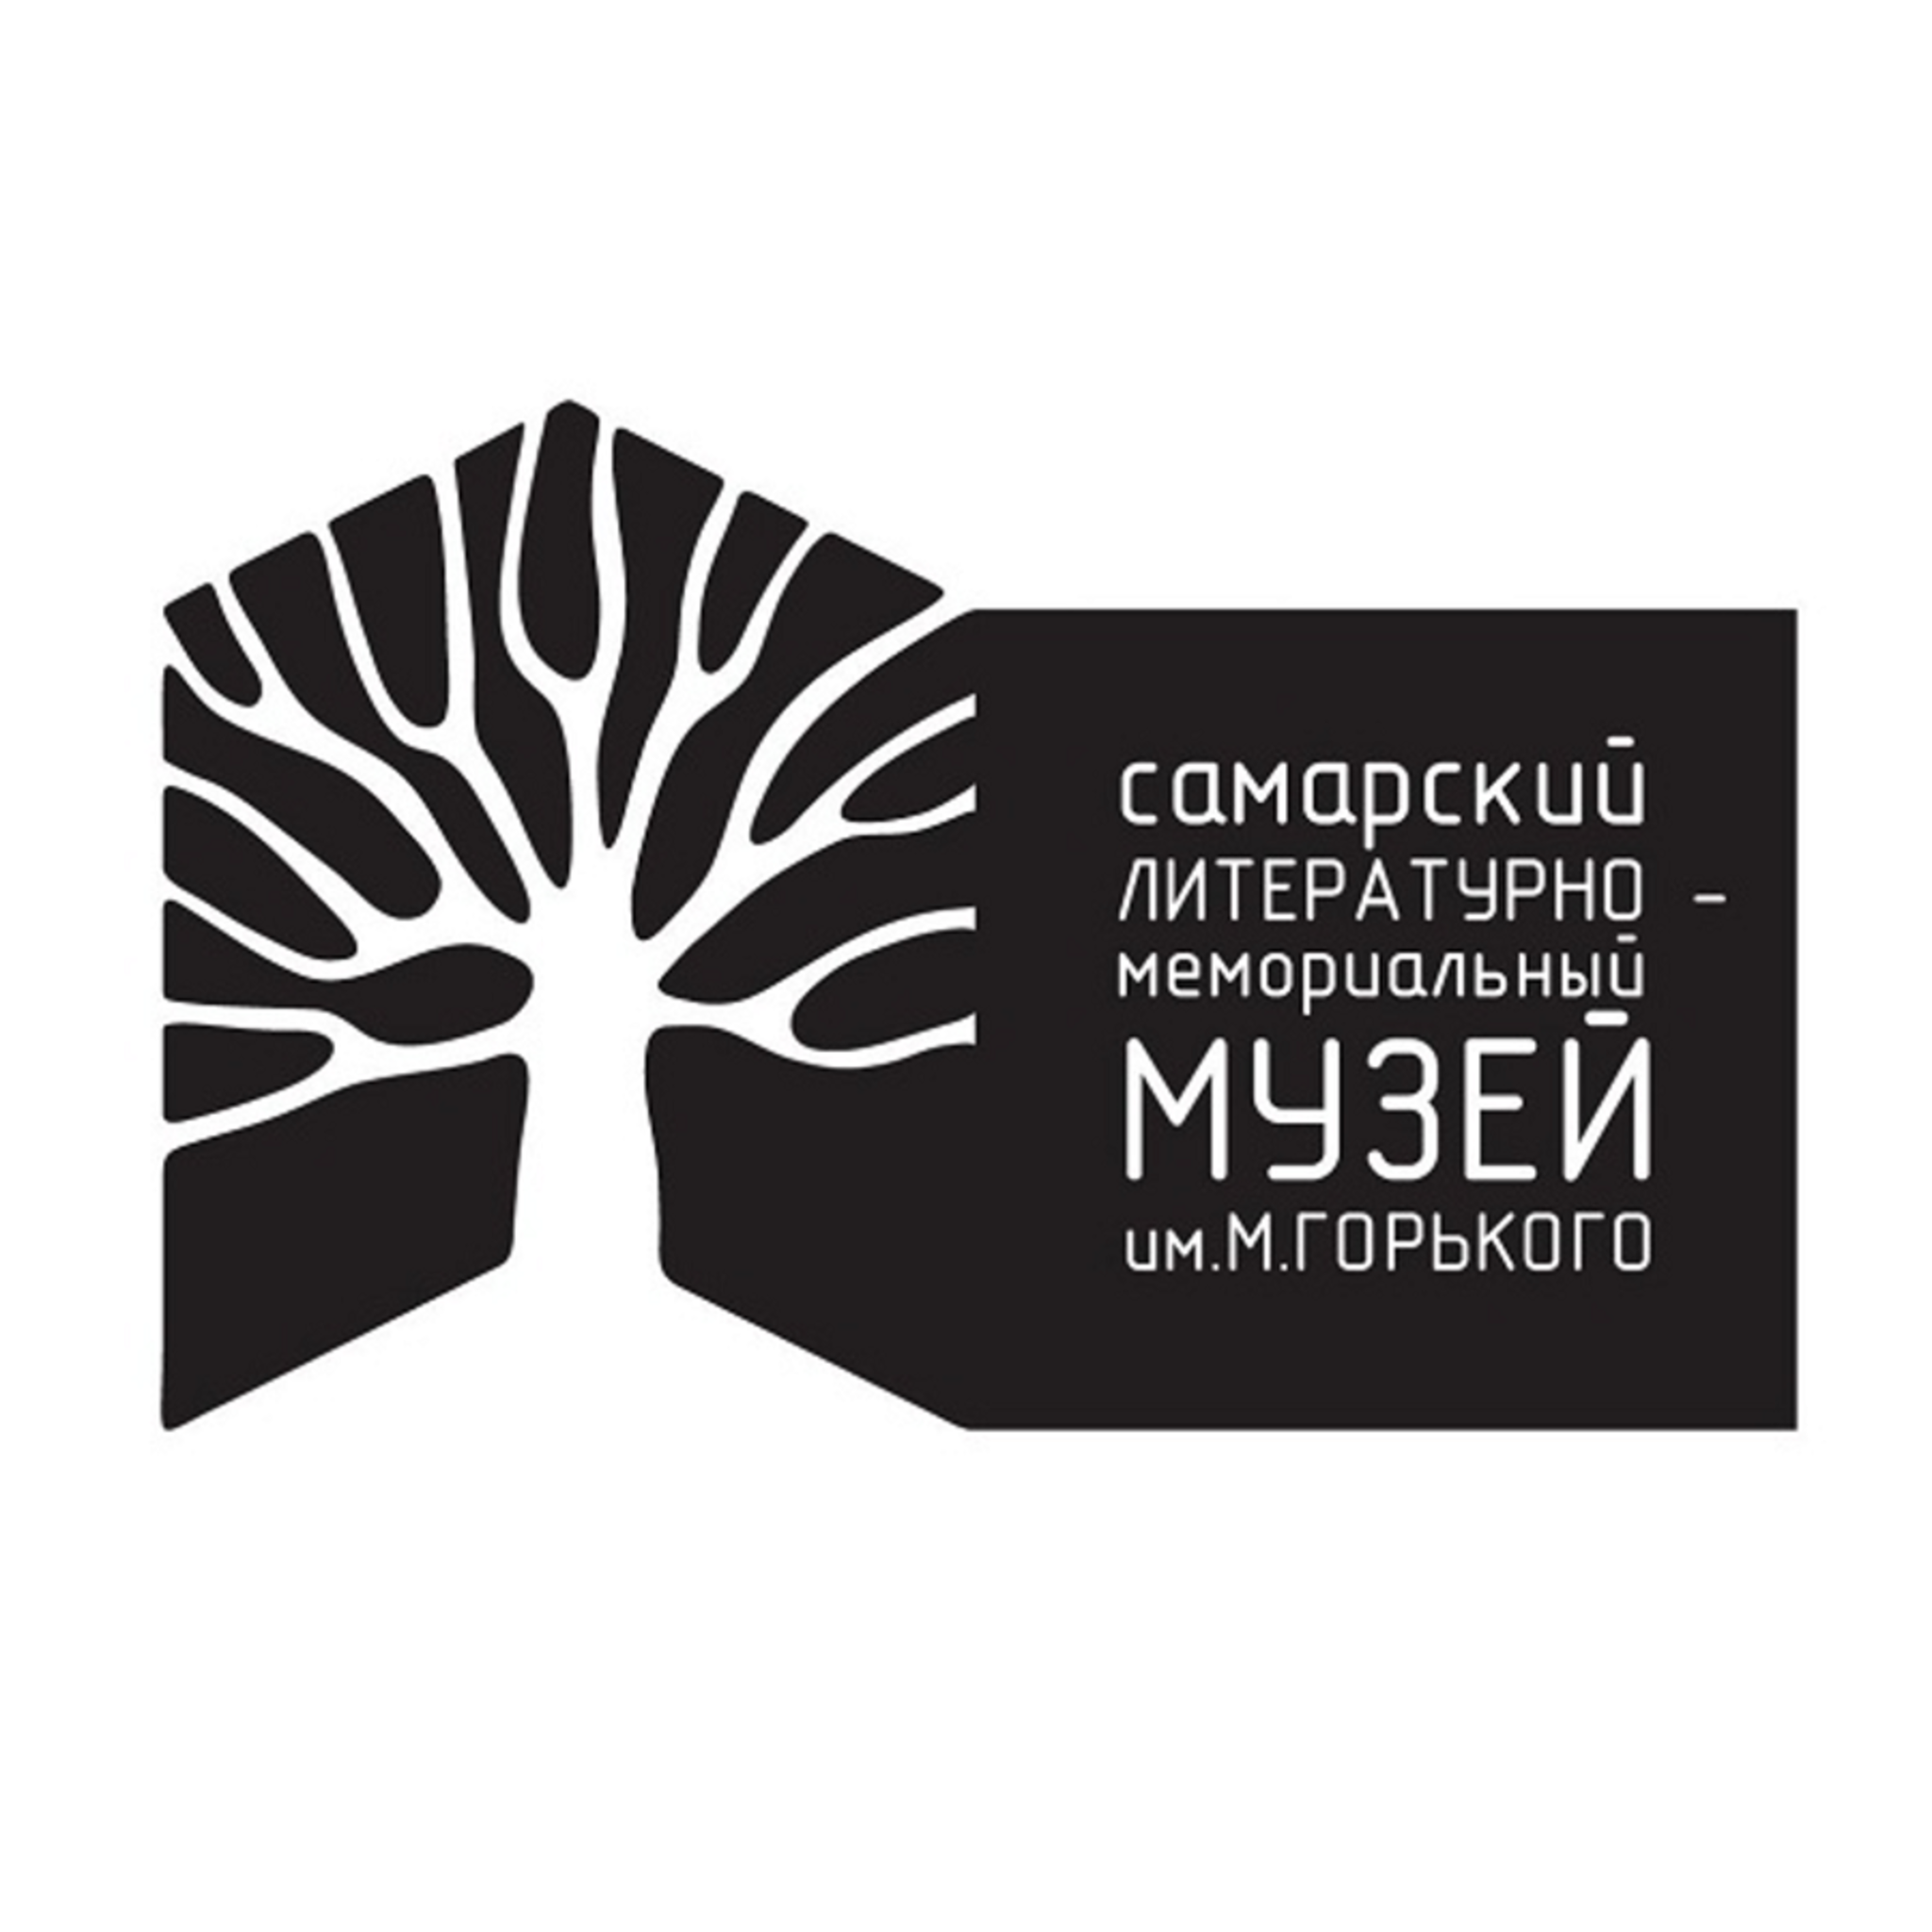 Programme of activities for the children in March 2017 in Samara Literary-Memorial Museum of. Gorky